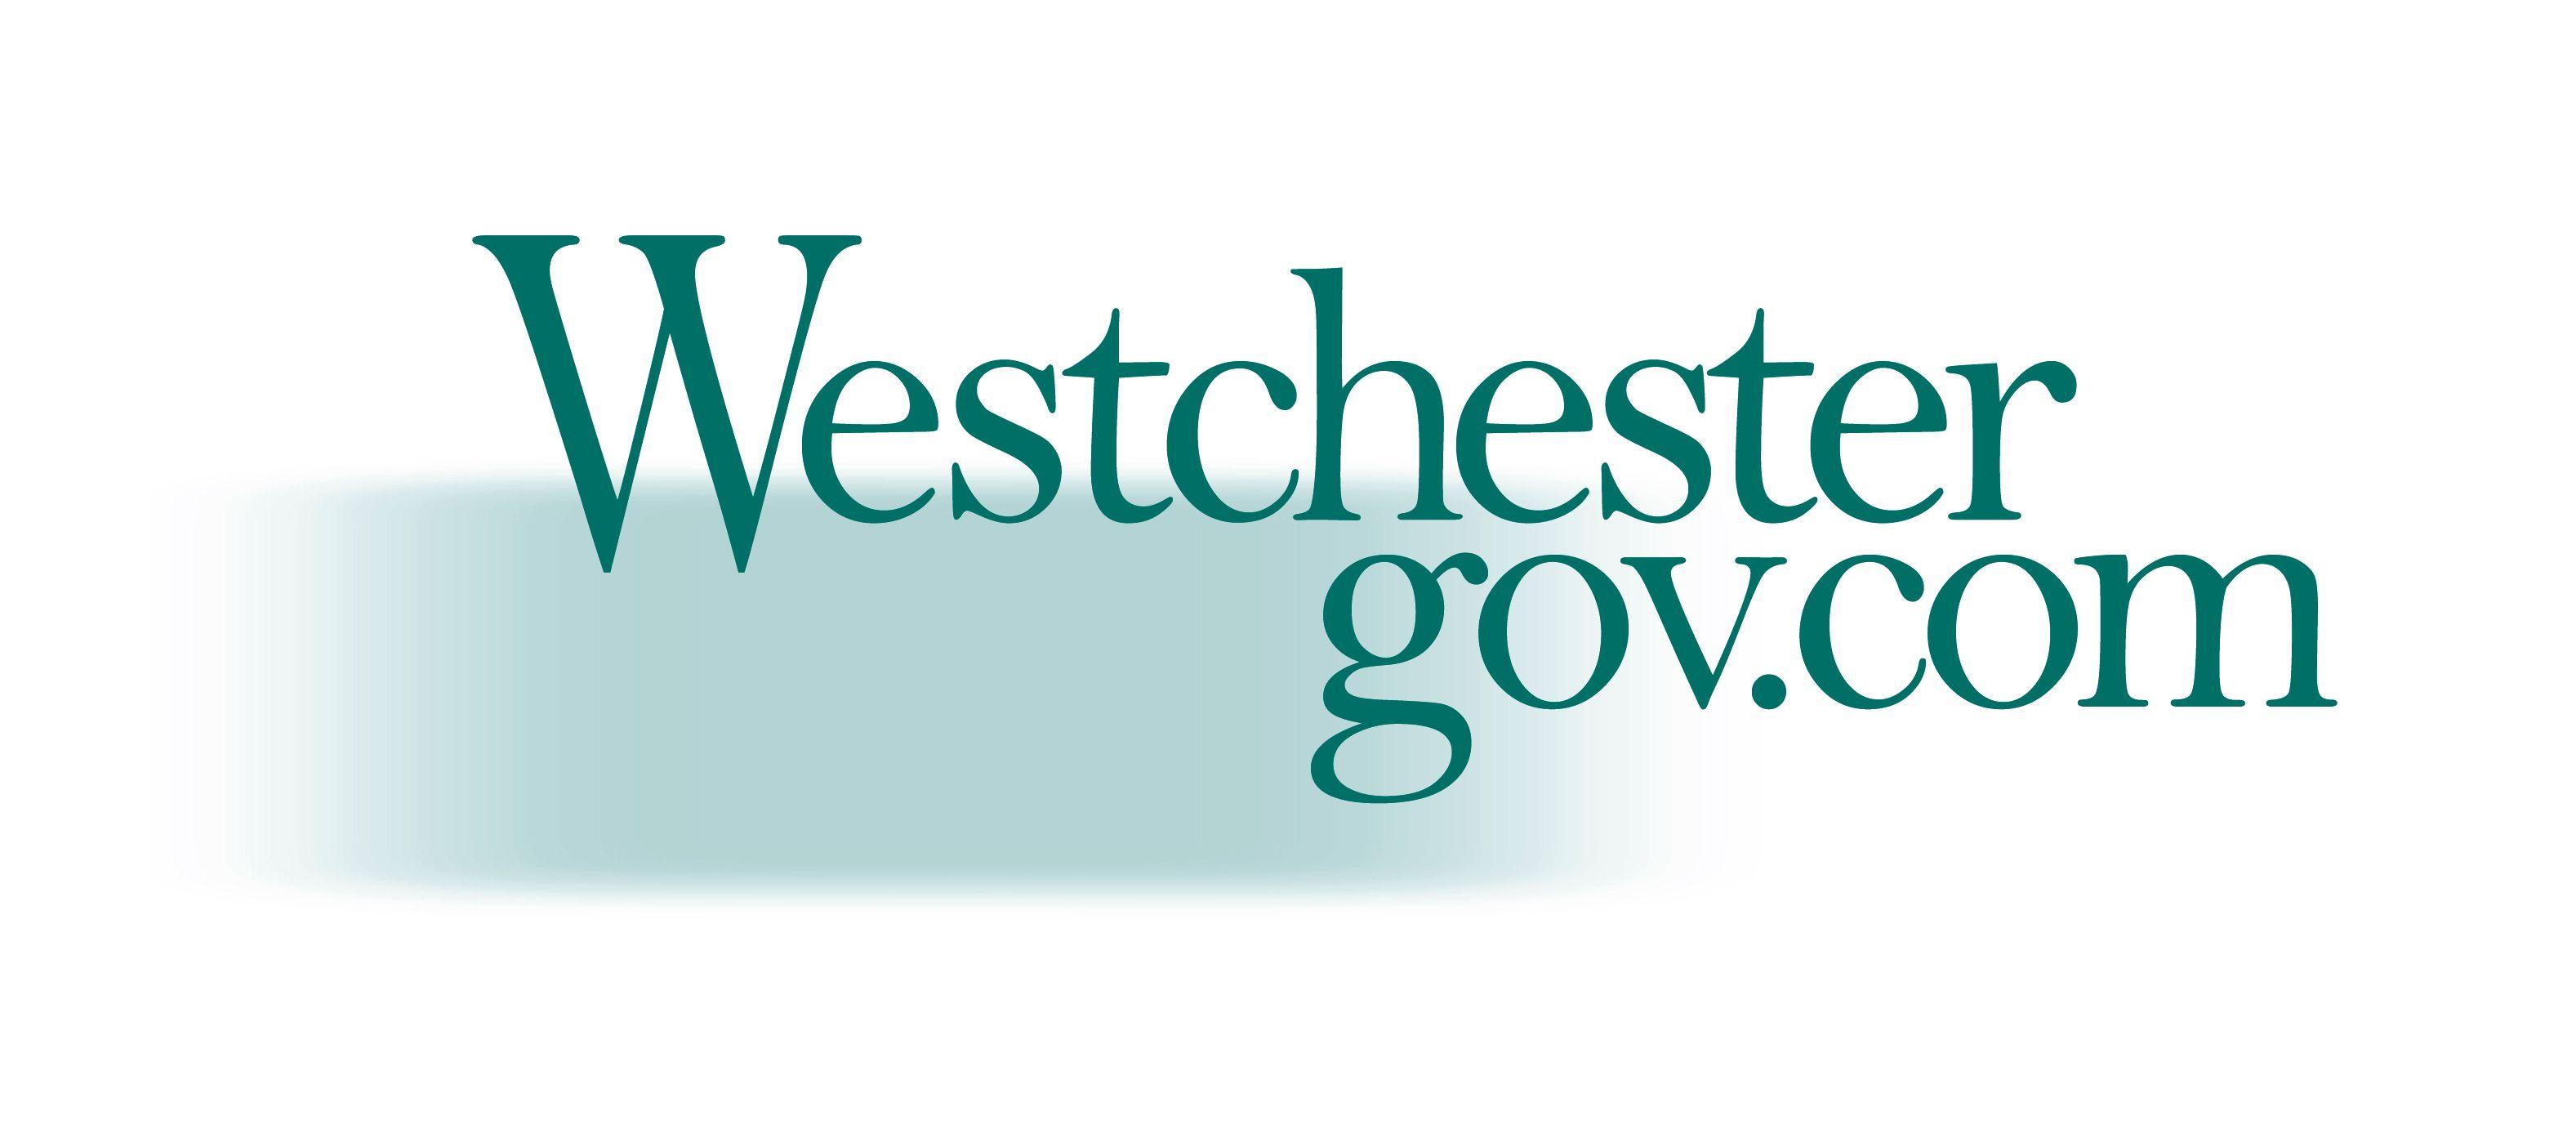 Westchester Logo - County Logo Guidelines